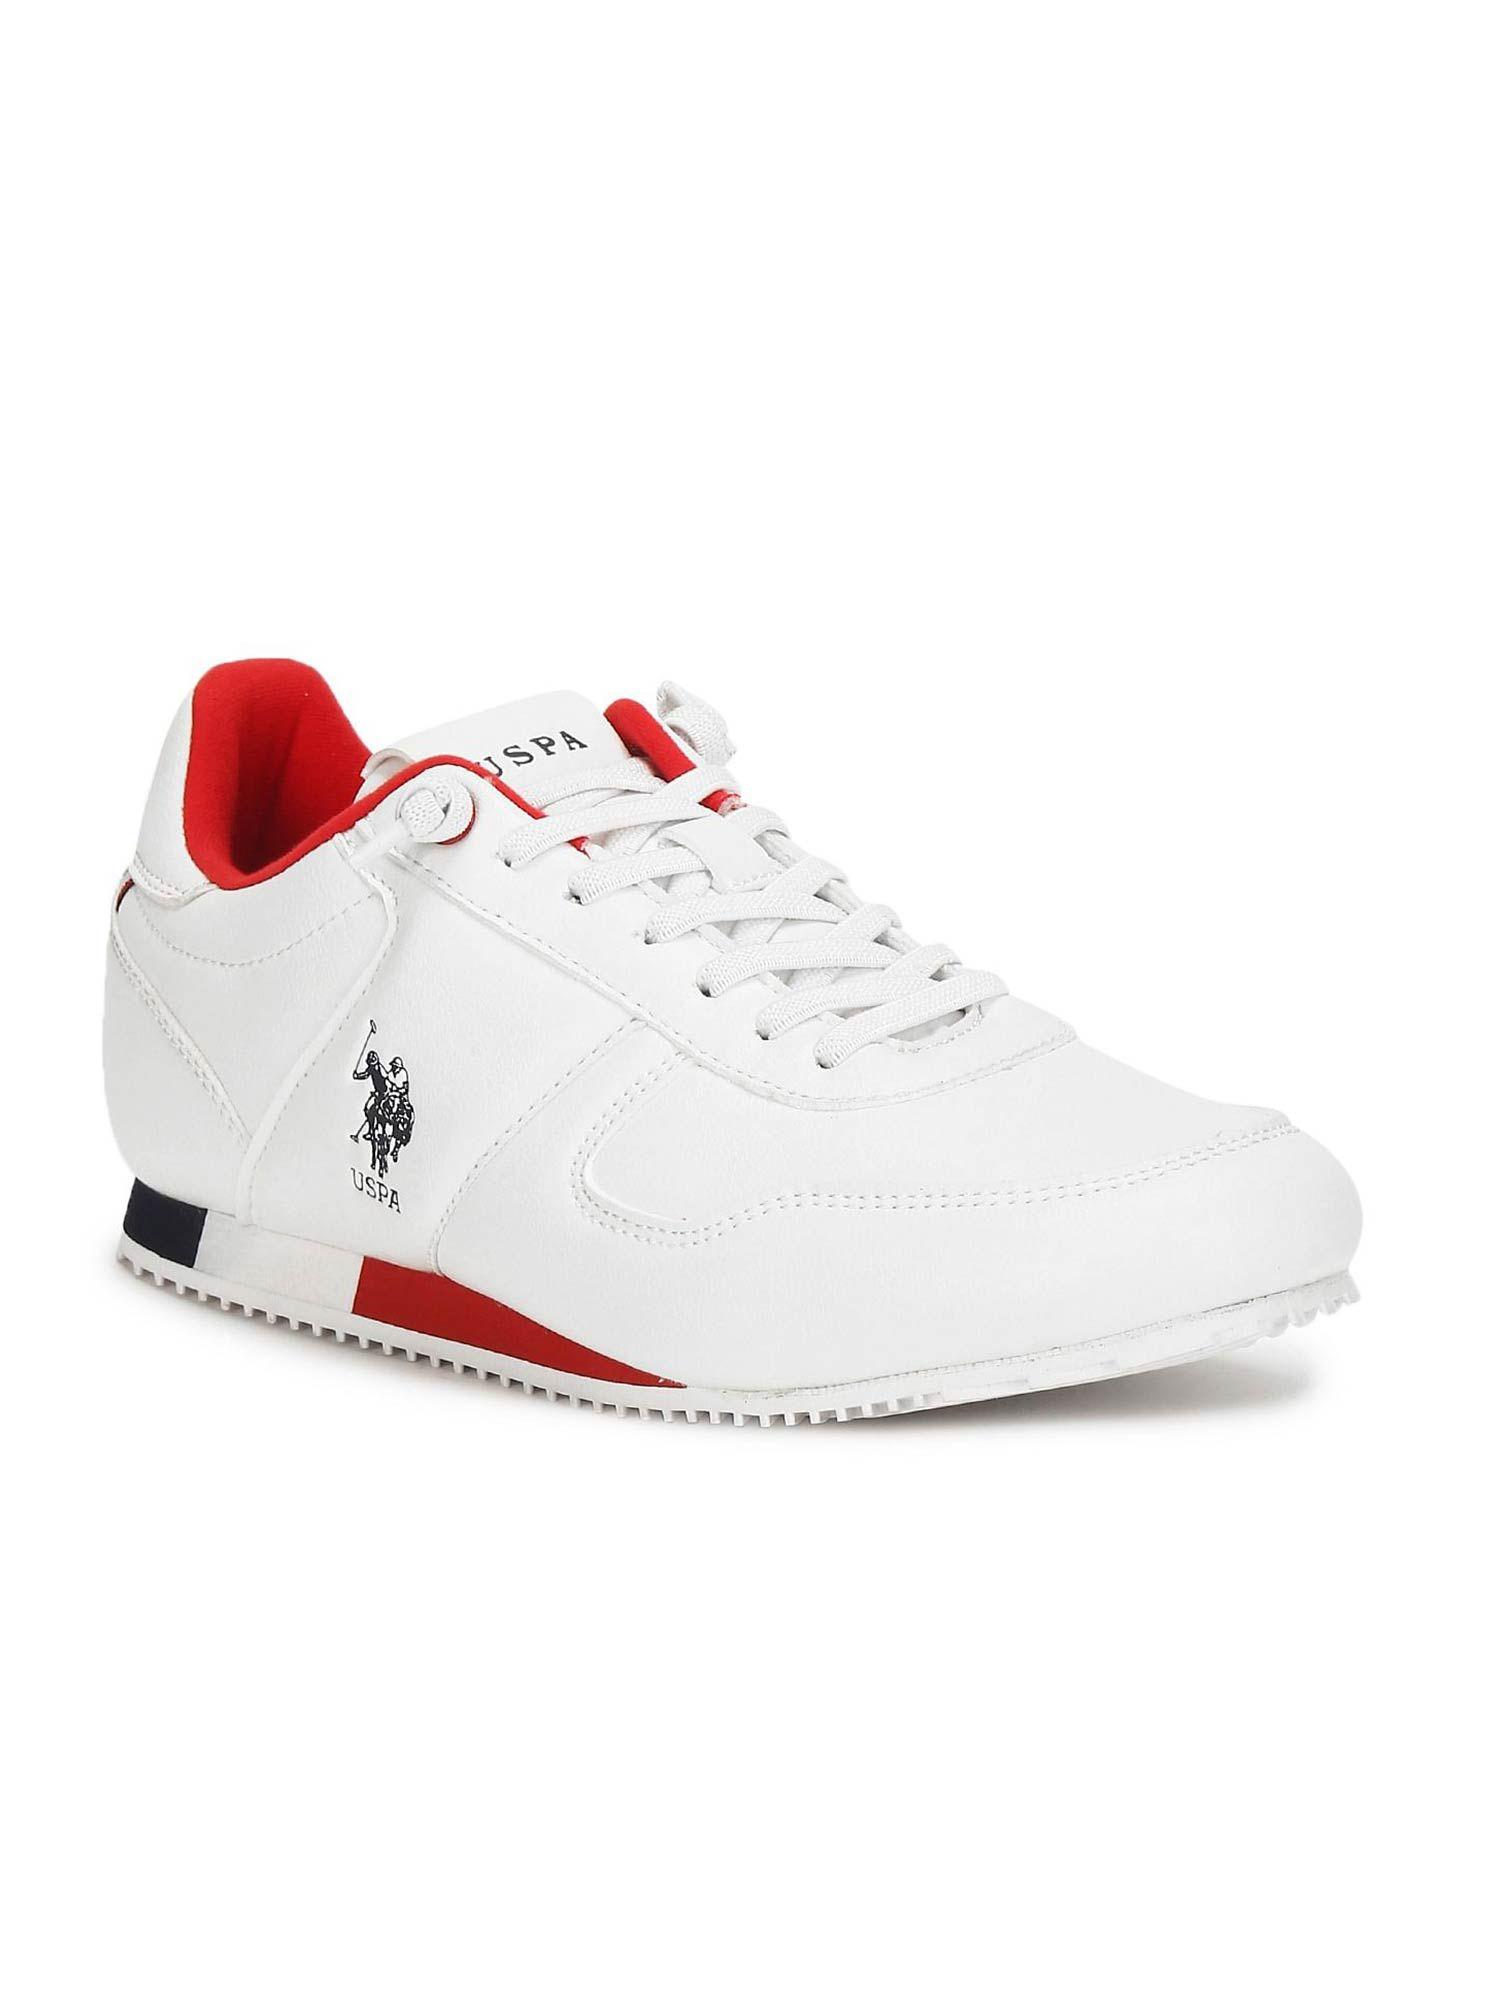 sorrento 2.0 off white solid sneakers for men